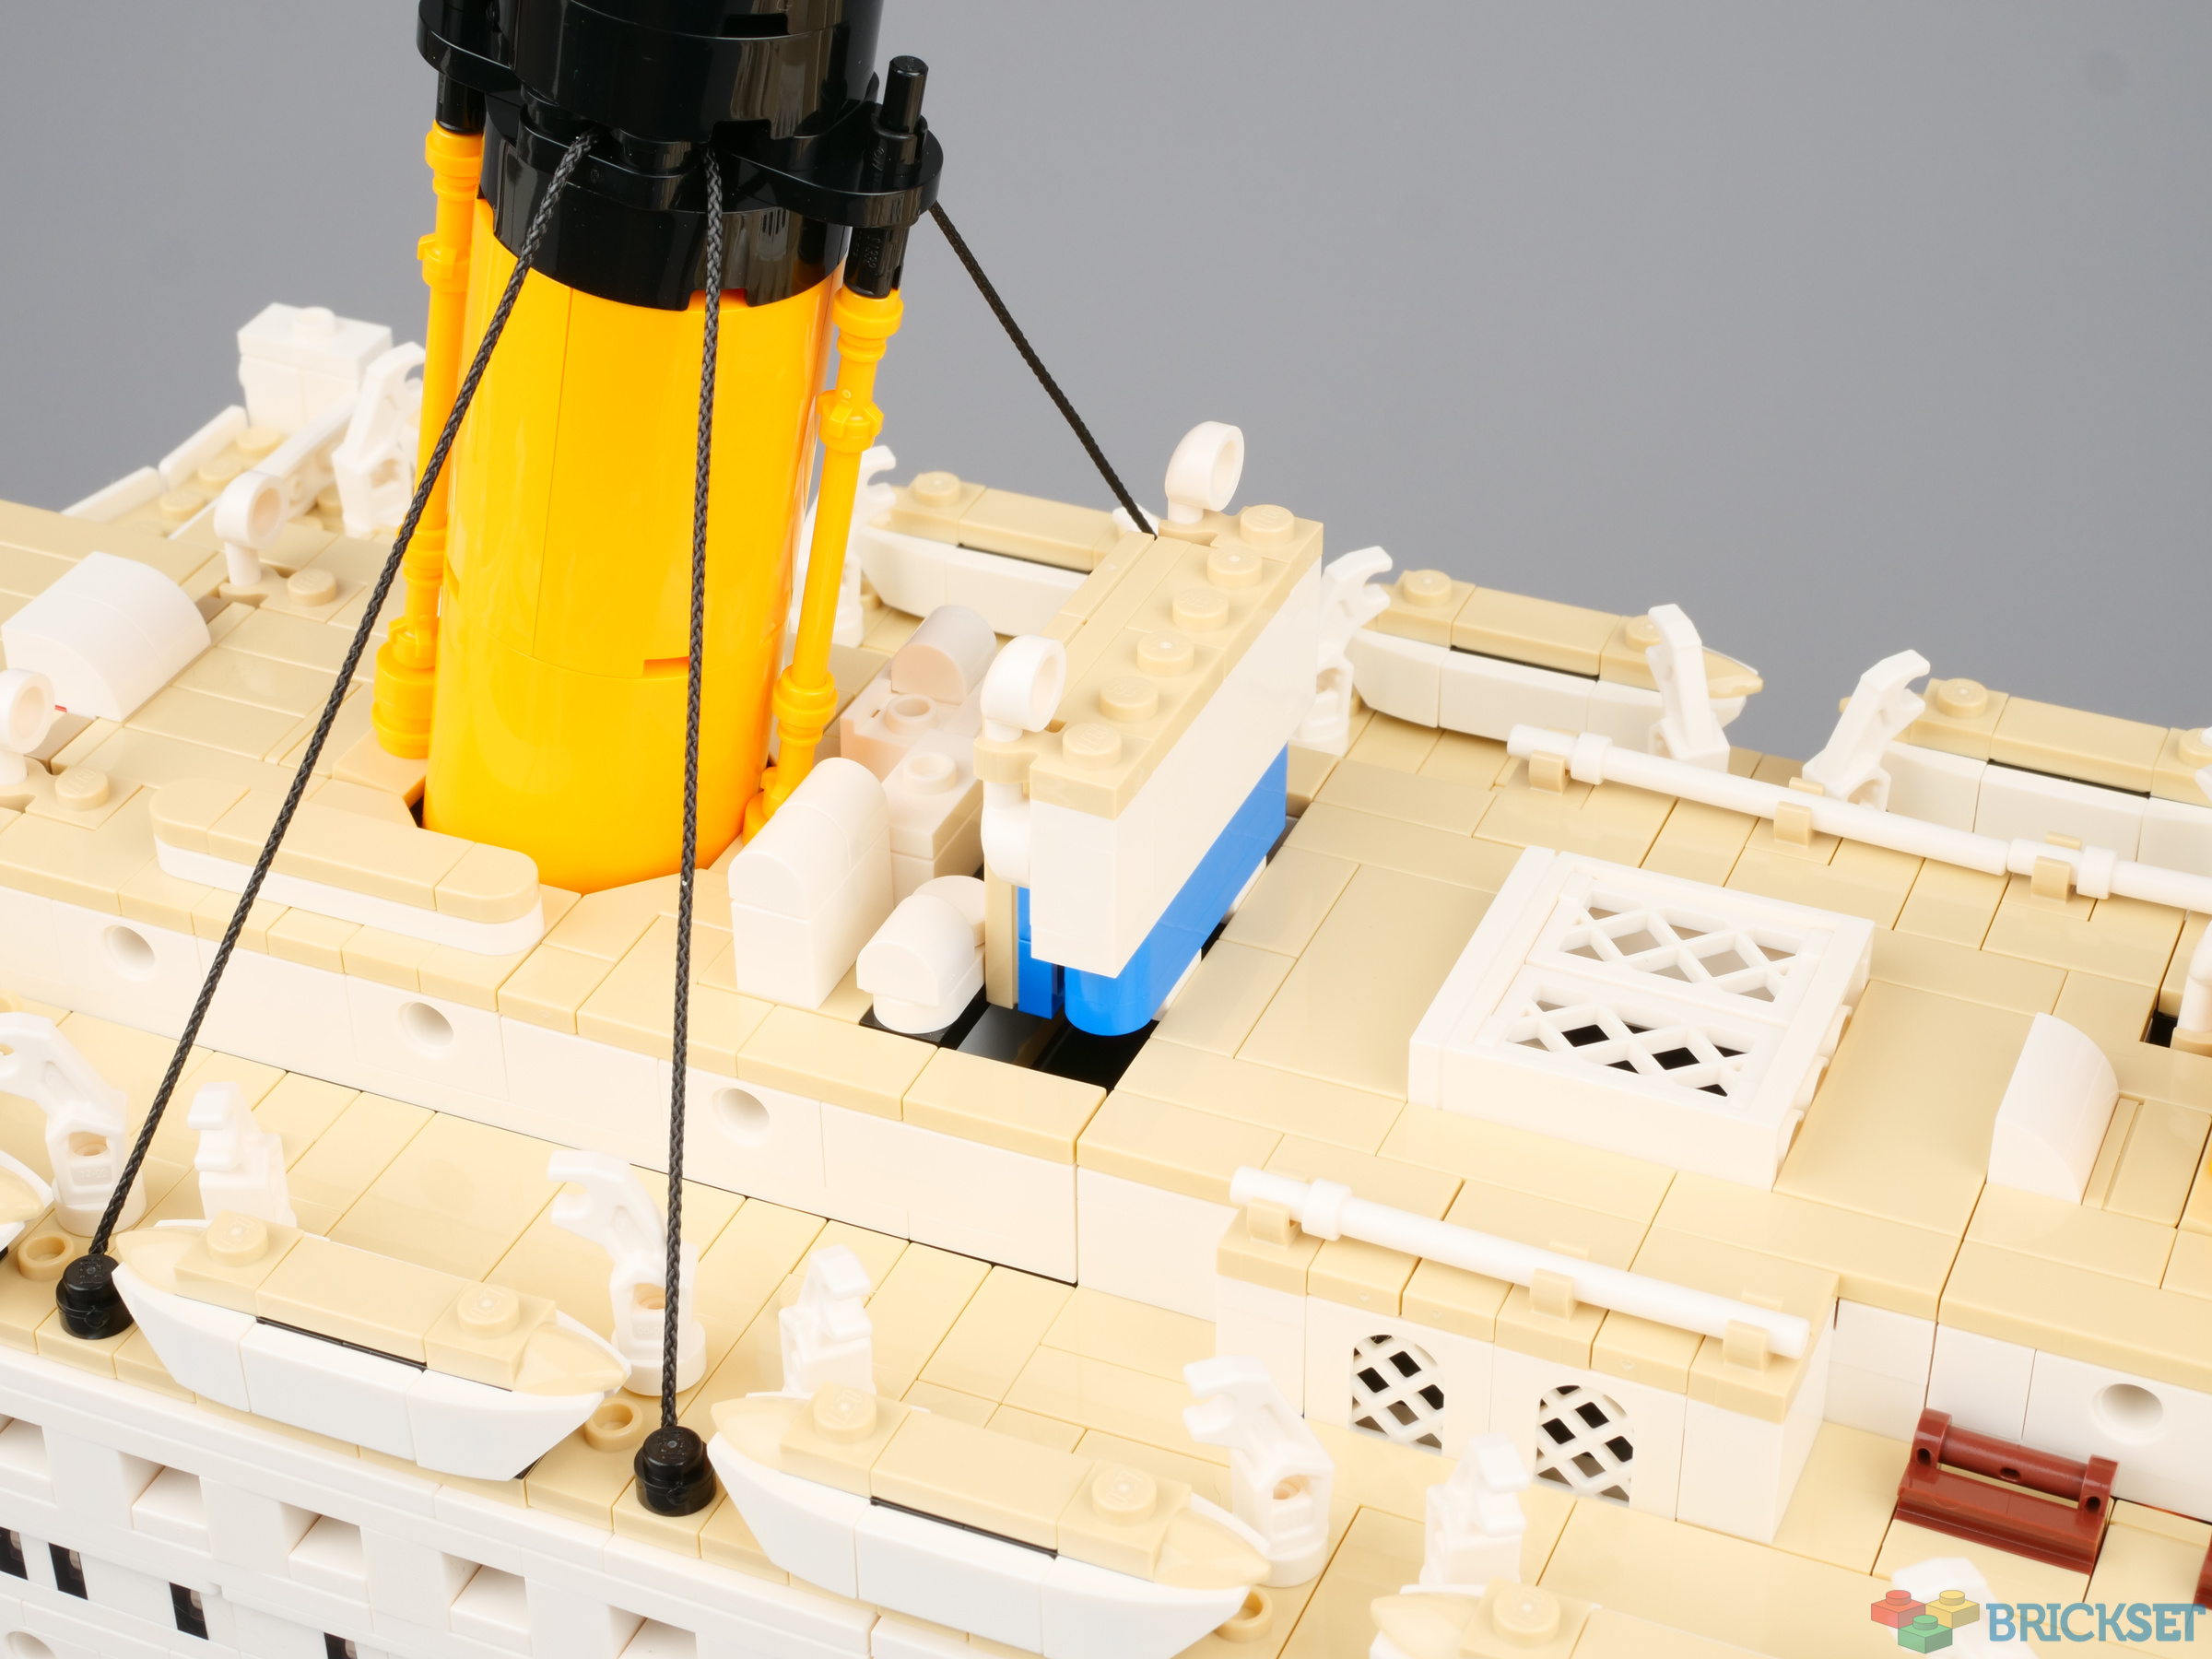 LEGO 10294 Titanic - 135 cm, 0 stickers & not hollow - detailed building  review 